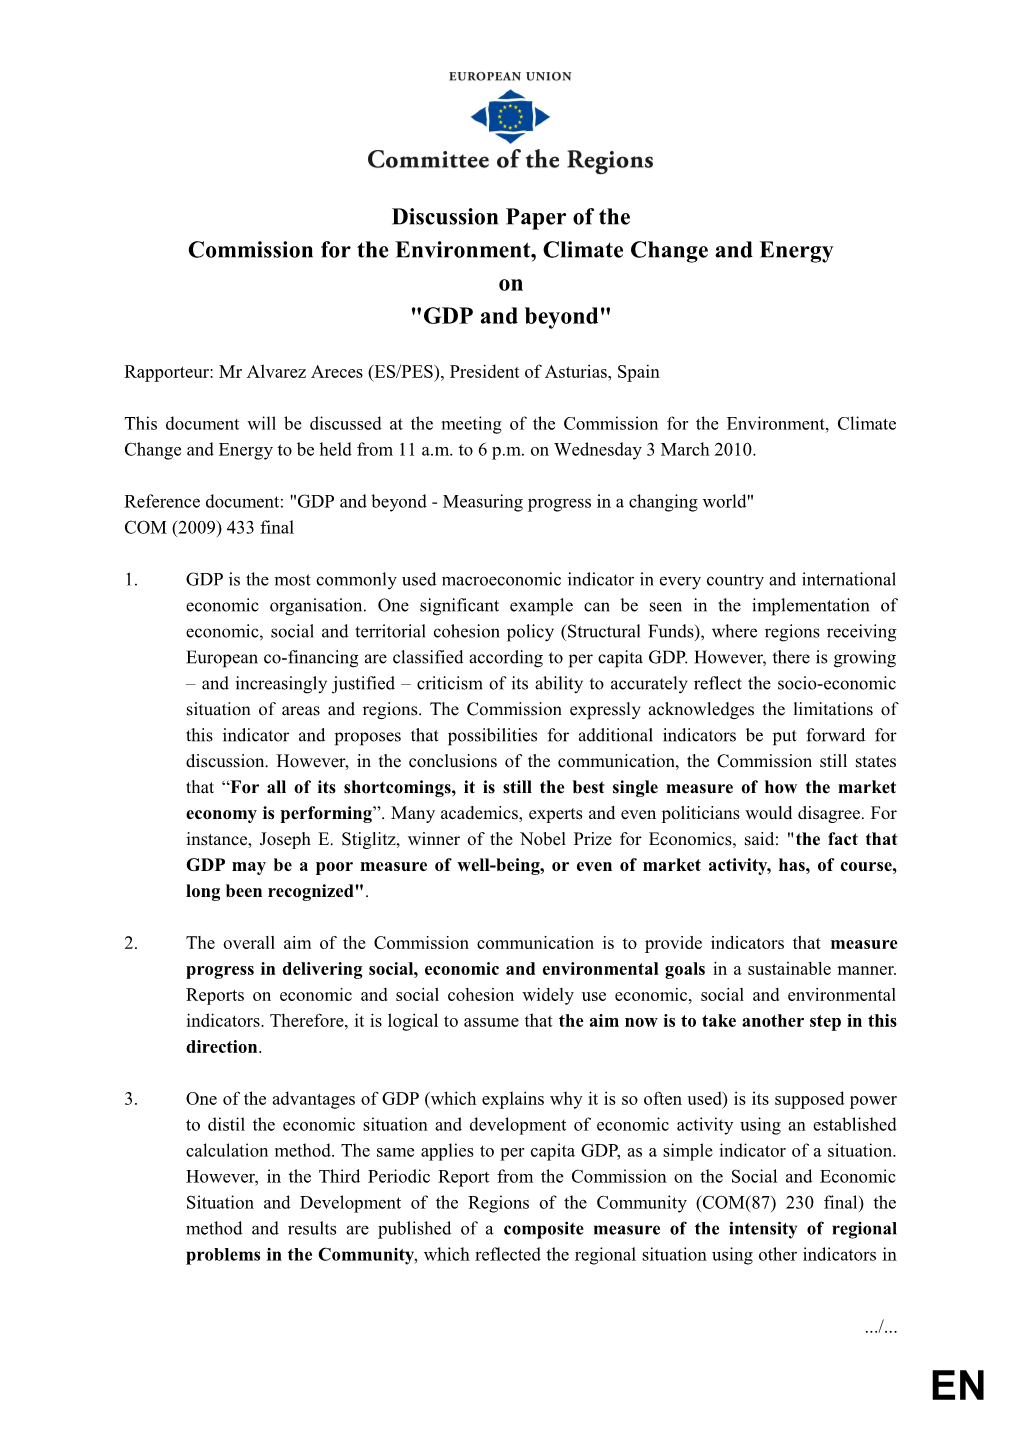 Discussion Paper of theCommission for the Environment, Climate Change and EnergyonGDP